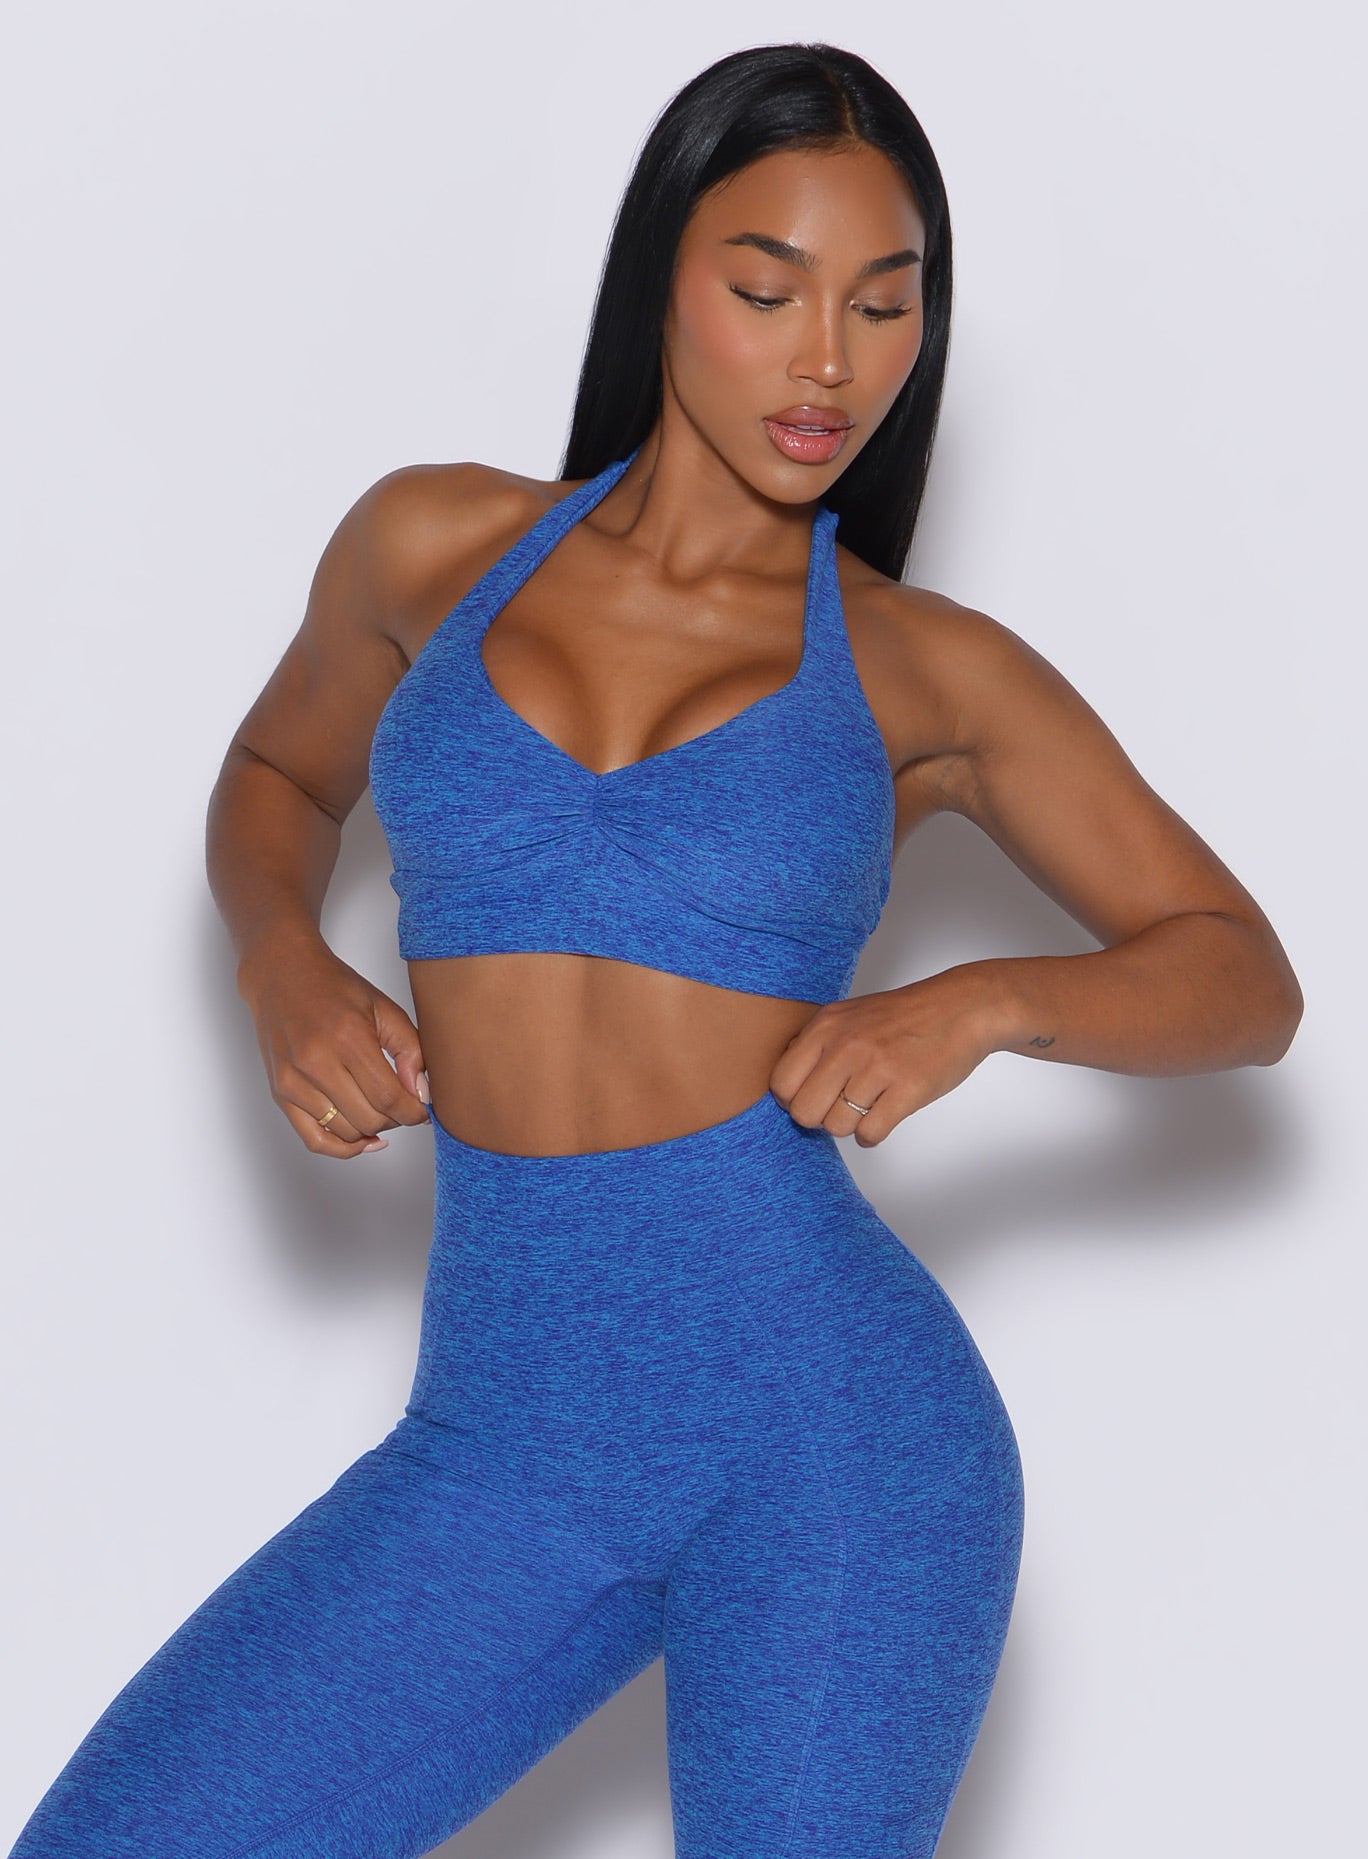 front profile view of a model wearing our backless bra in Neon blue rave color along with the matching leggings